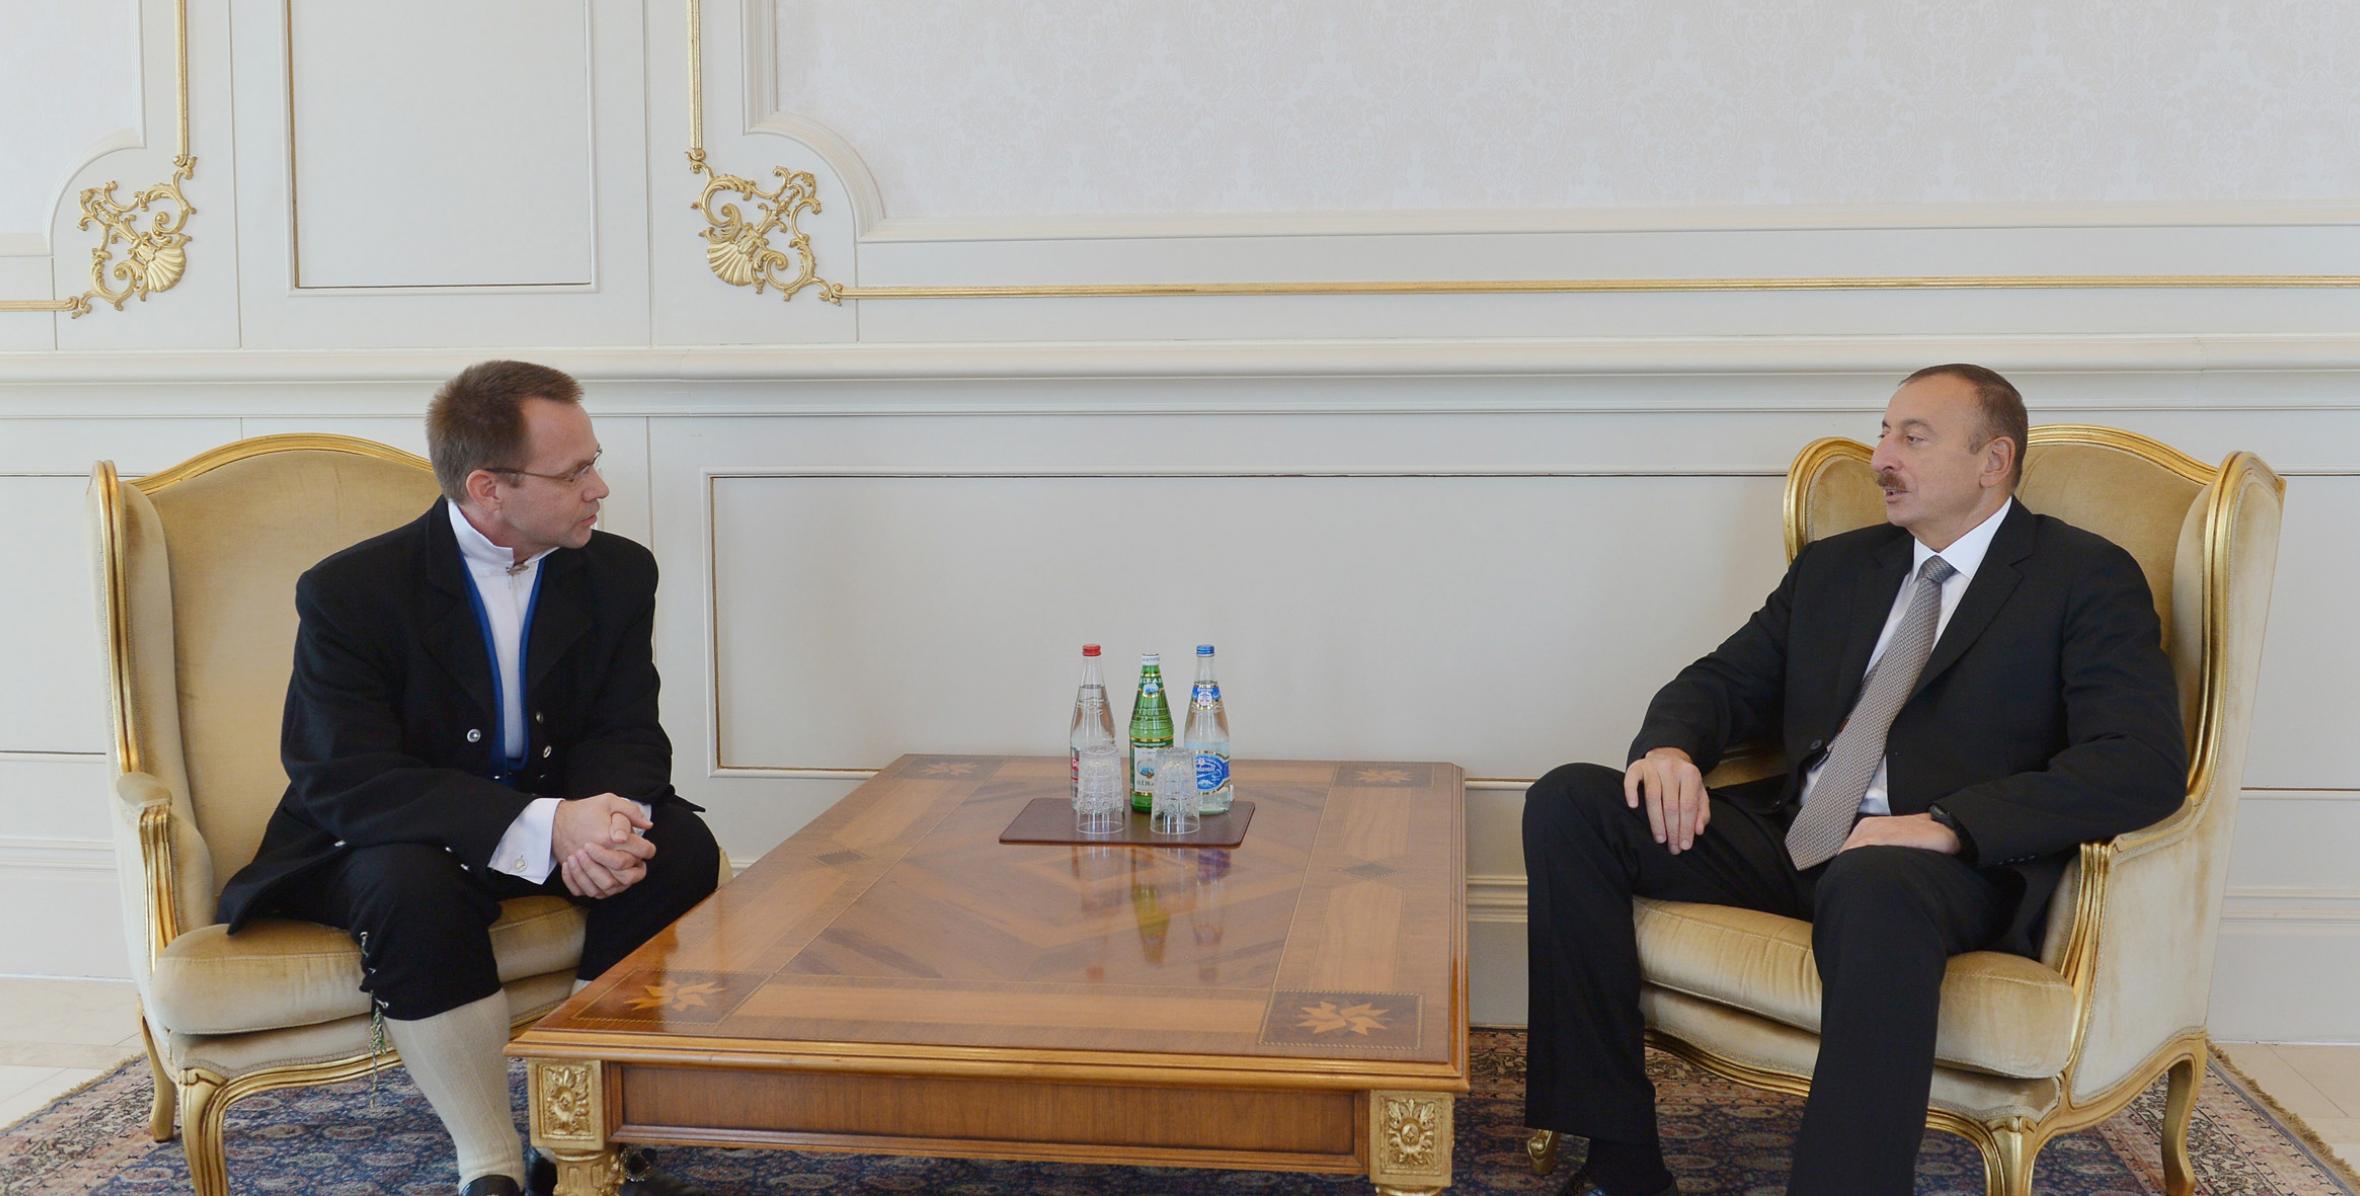 Ilham Aliyev received the newly-appointed Norwegian Ambassador